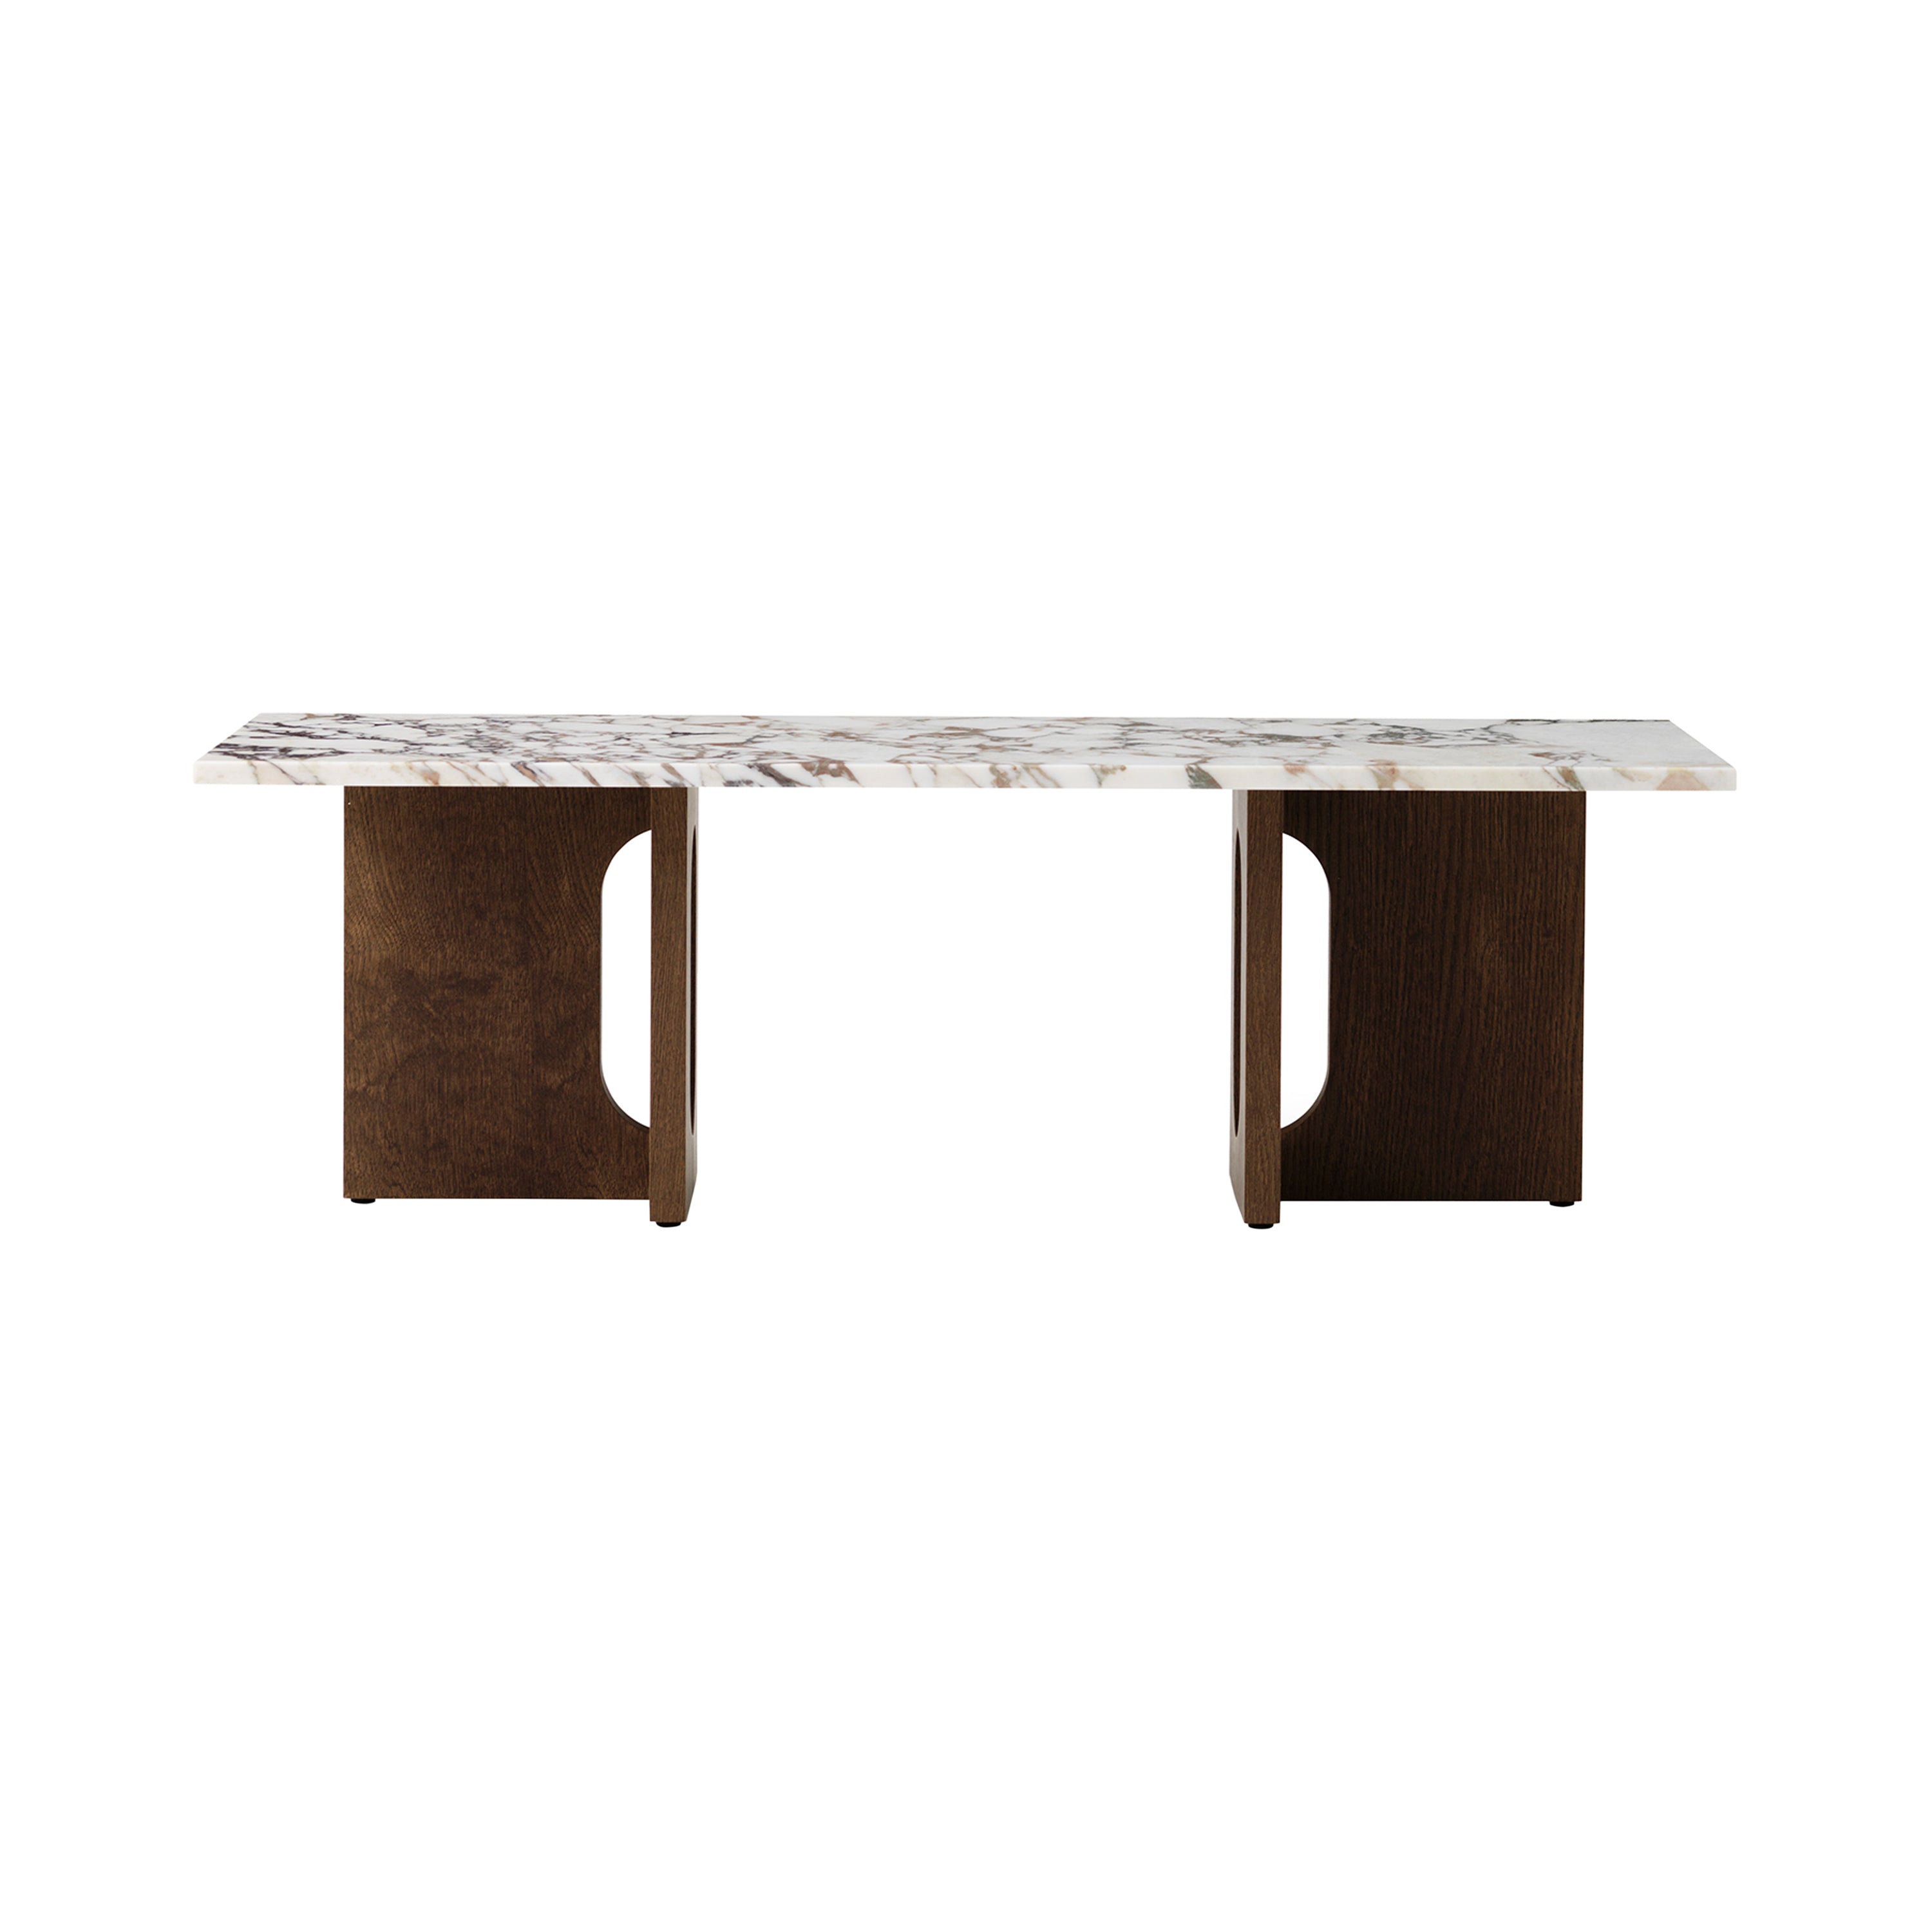 Androgyne Lounge Table: Dark Stained Oak + Calacatta Viola Marble